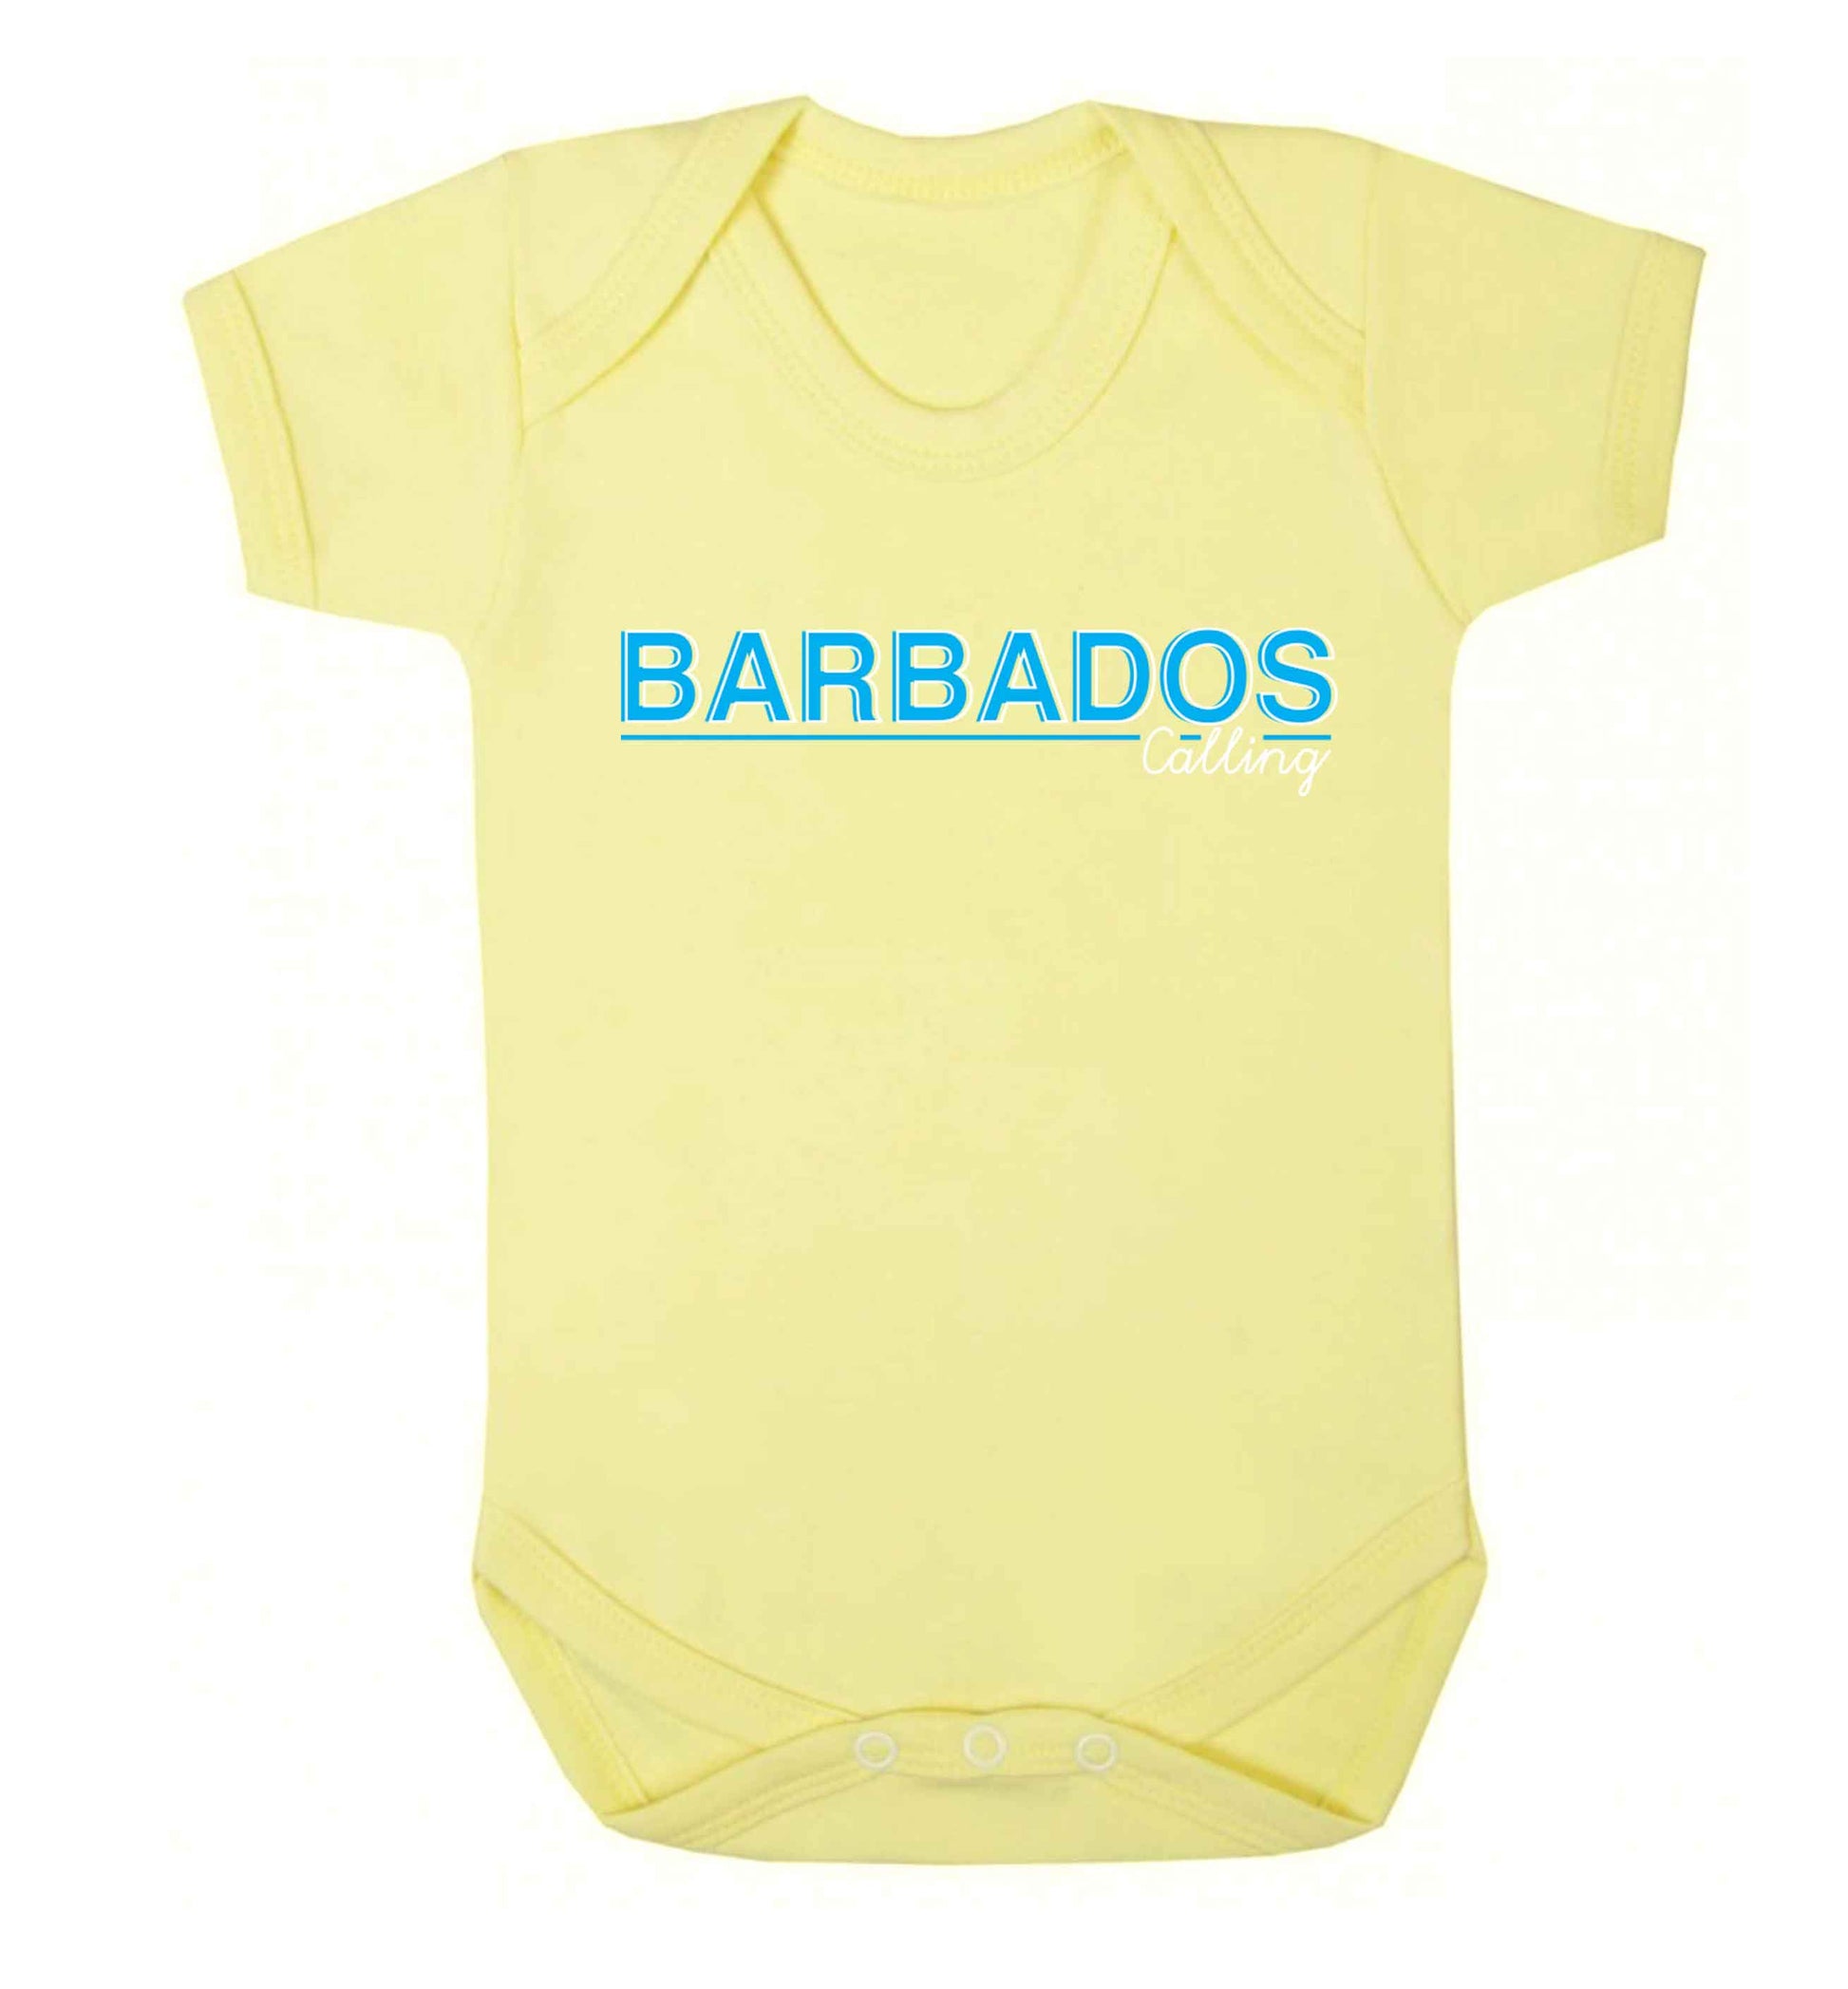 Barbados calling Baby Vest pale yellow 18-24 months